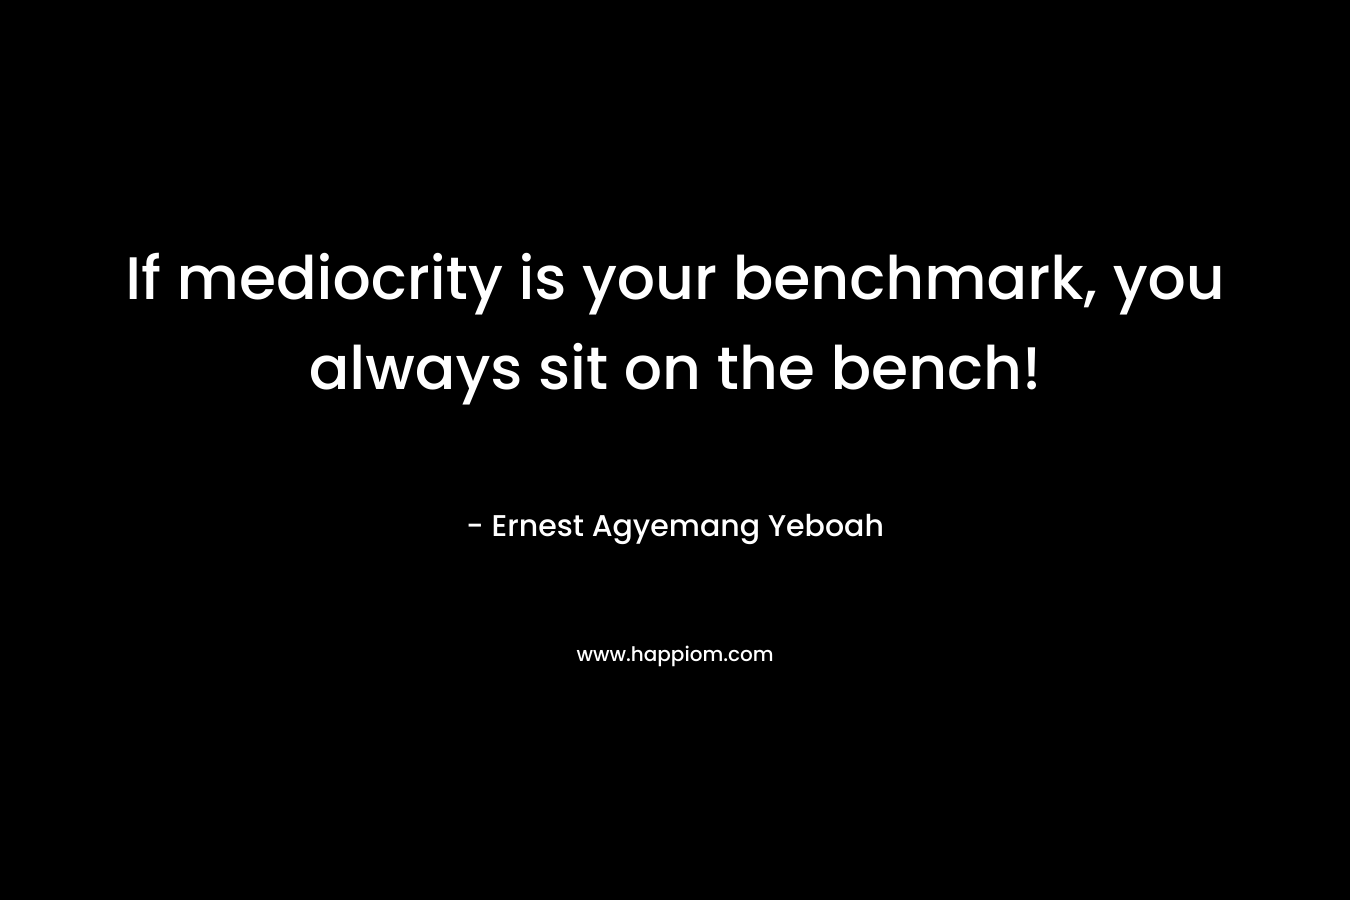 If mediocrity is your benchmark, you always sit on the bench!